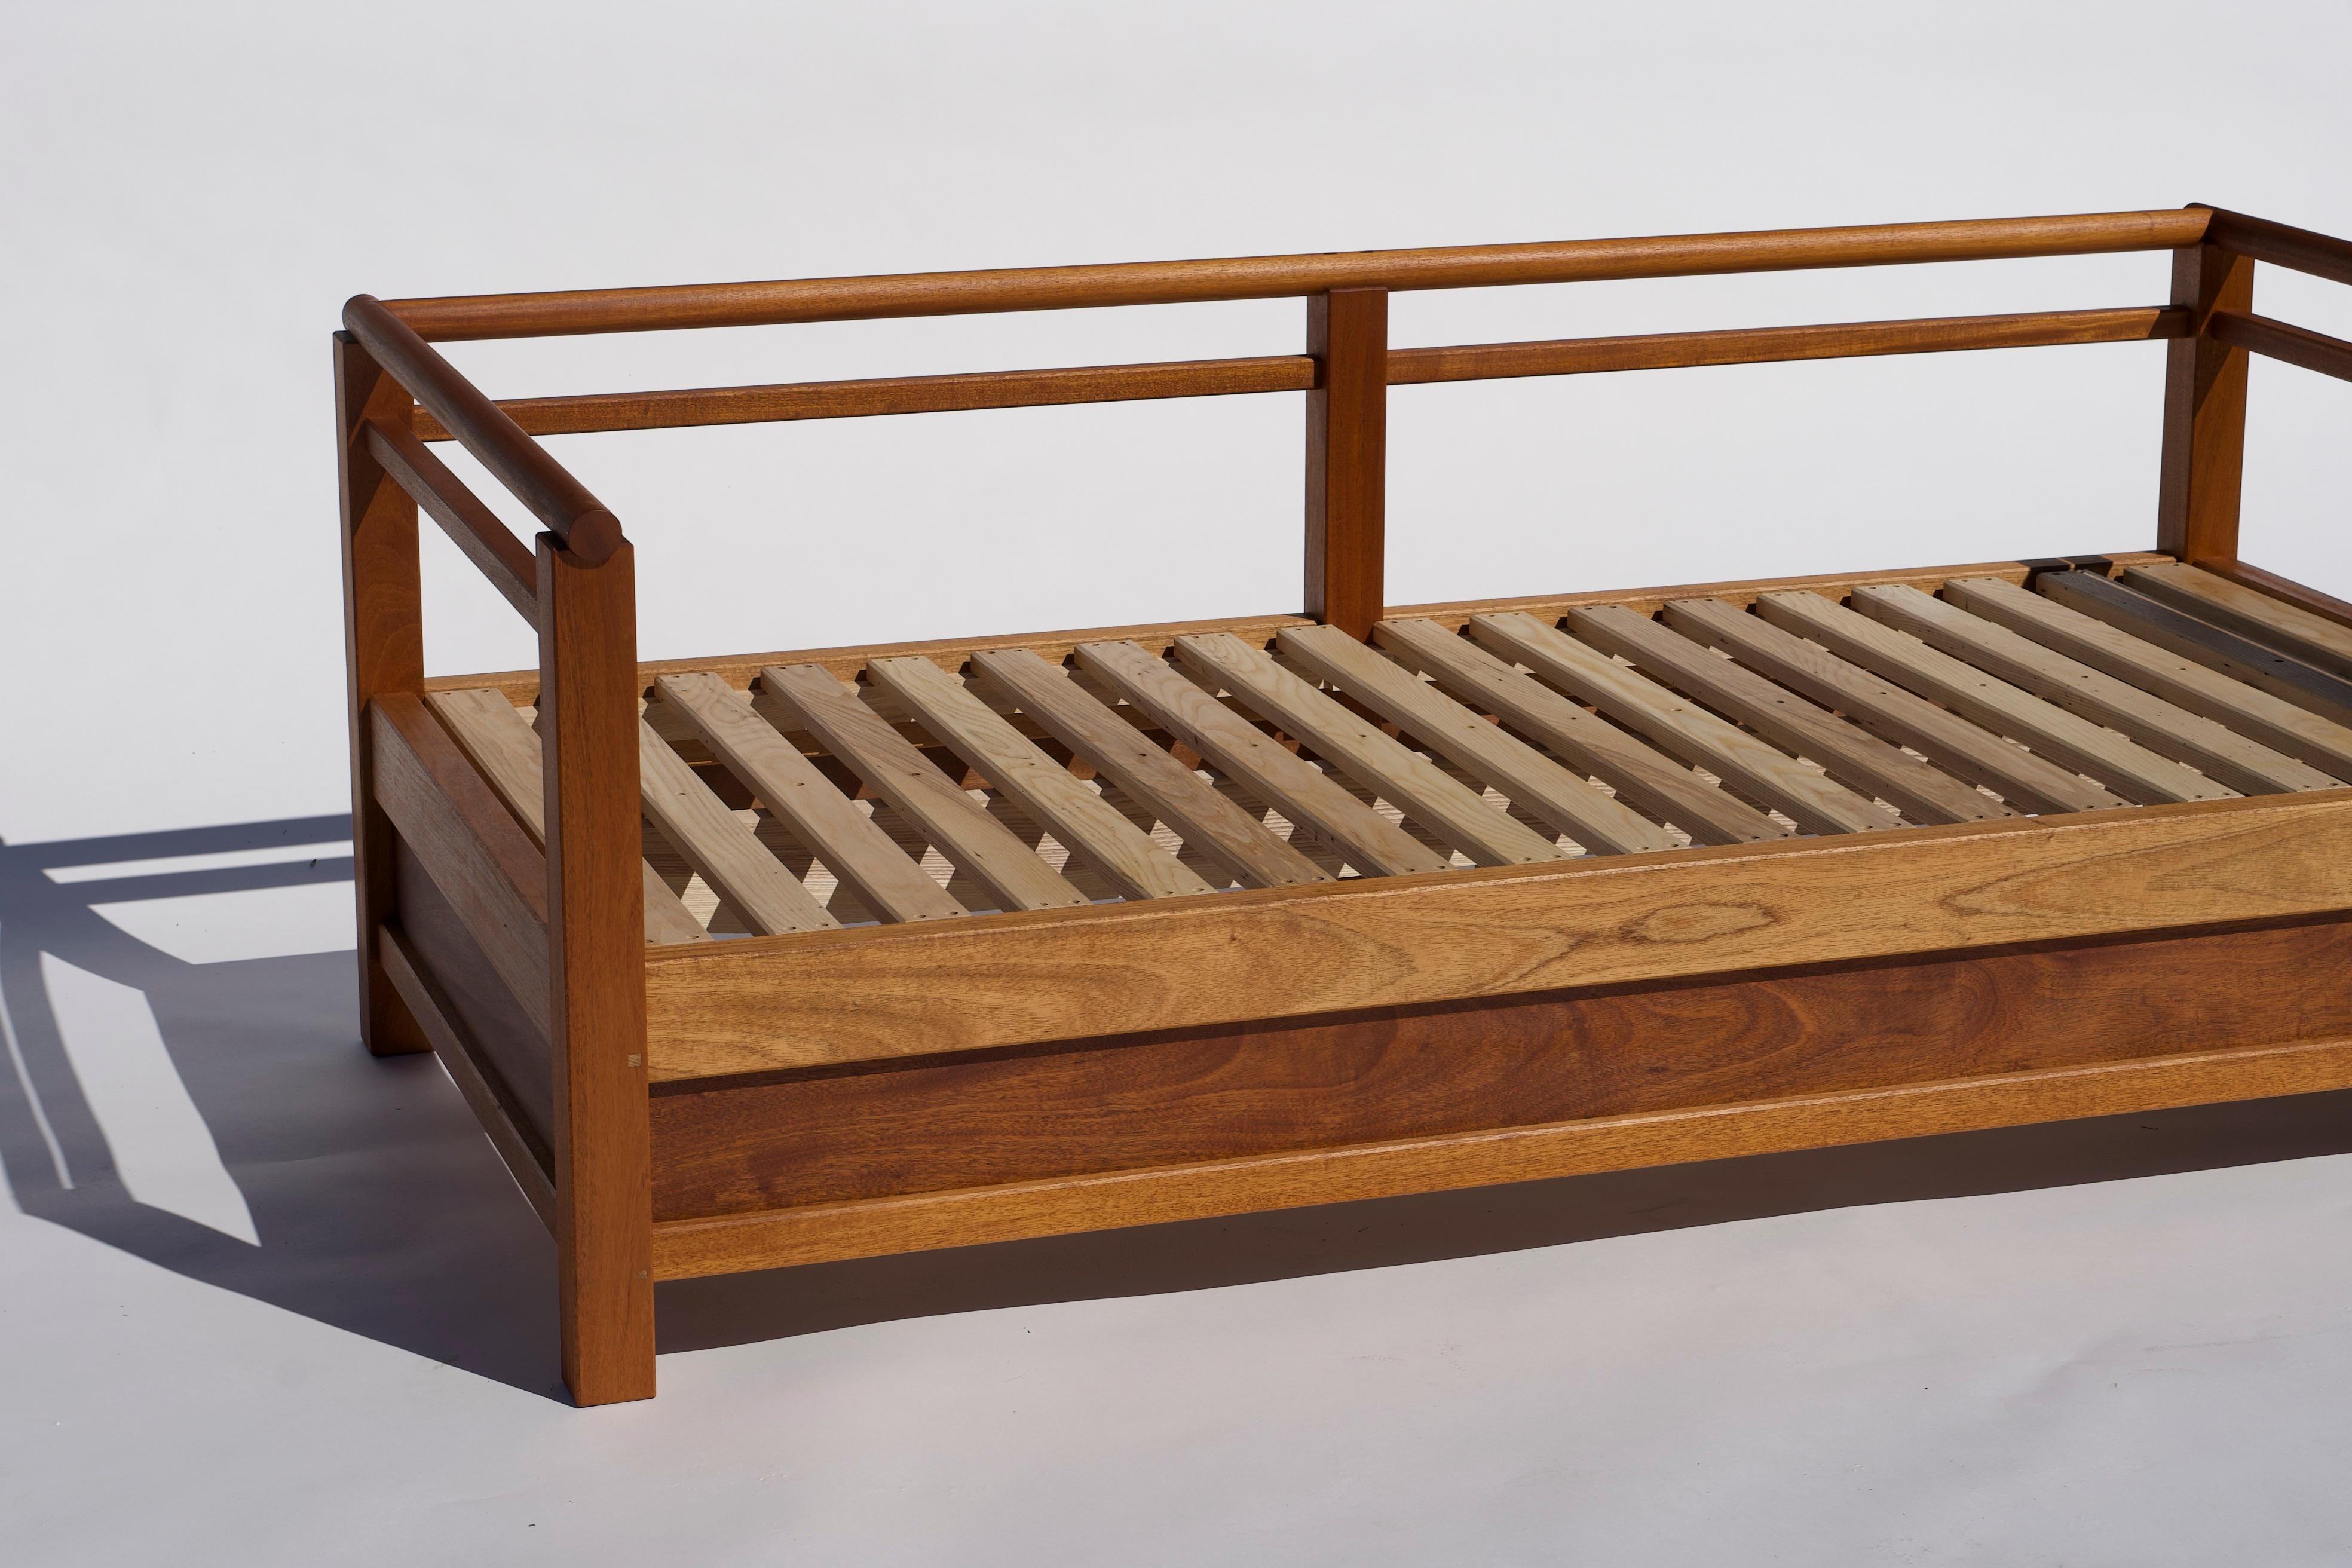 This daybed was inspired by the Uji bridge at Naiku temple in Japan. It is featured in Honduran mahogany and made for indoor/outdoor use in Honduran mahogany. This daybed is also available in oiled walnut or oiled ash. 

The construction of this